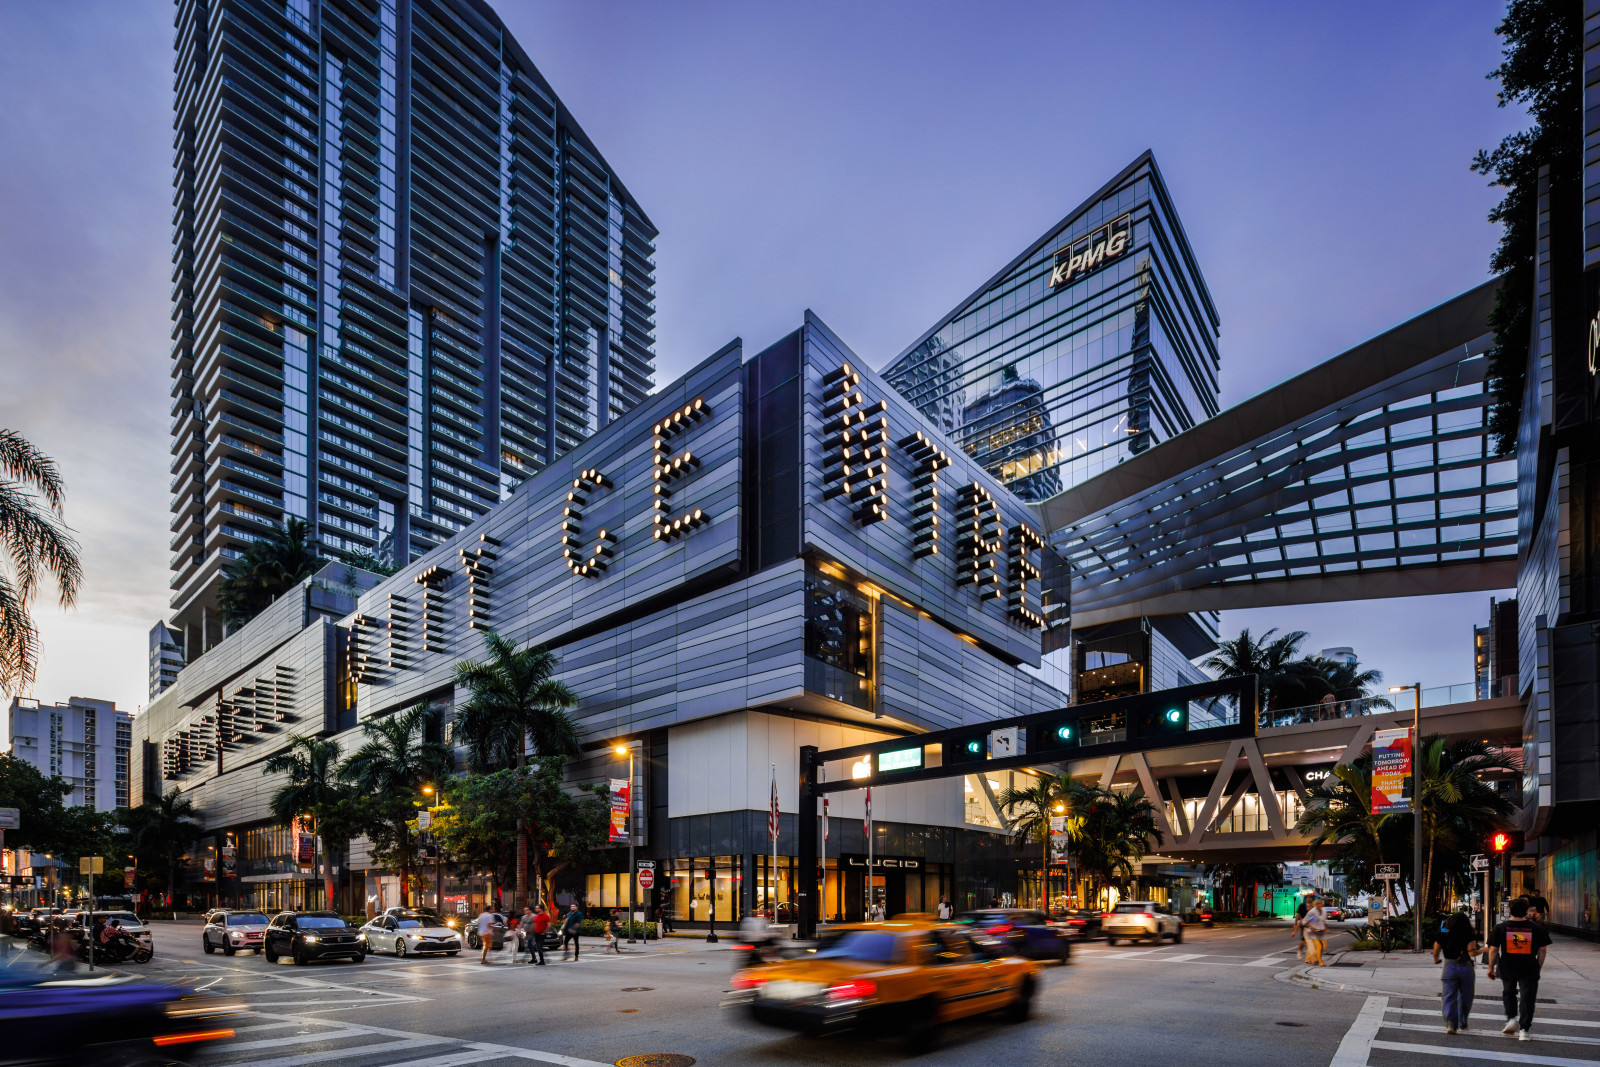 Miami offers a whole new shopping experience. Come experience a